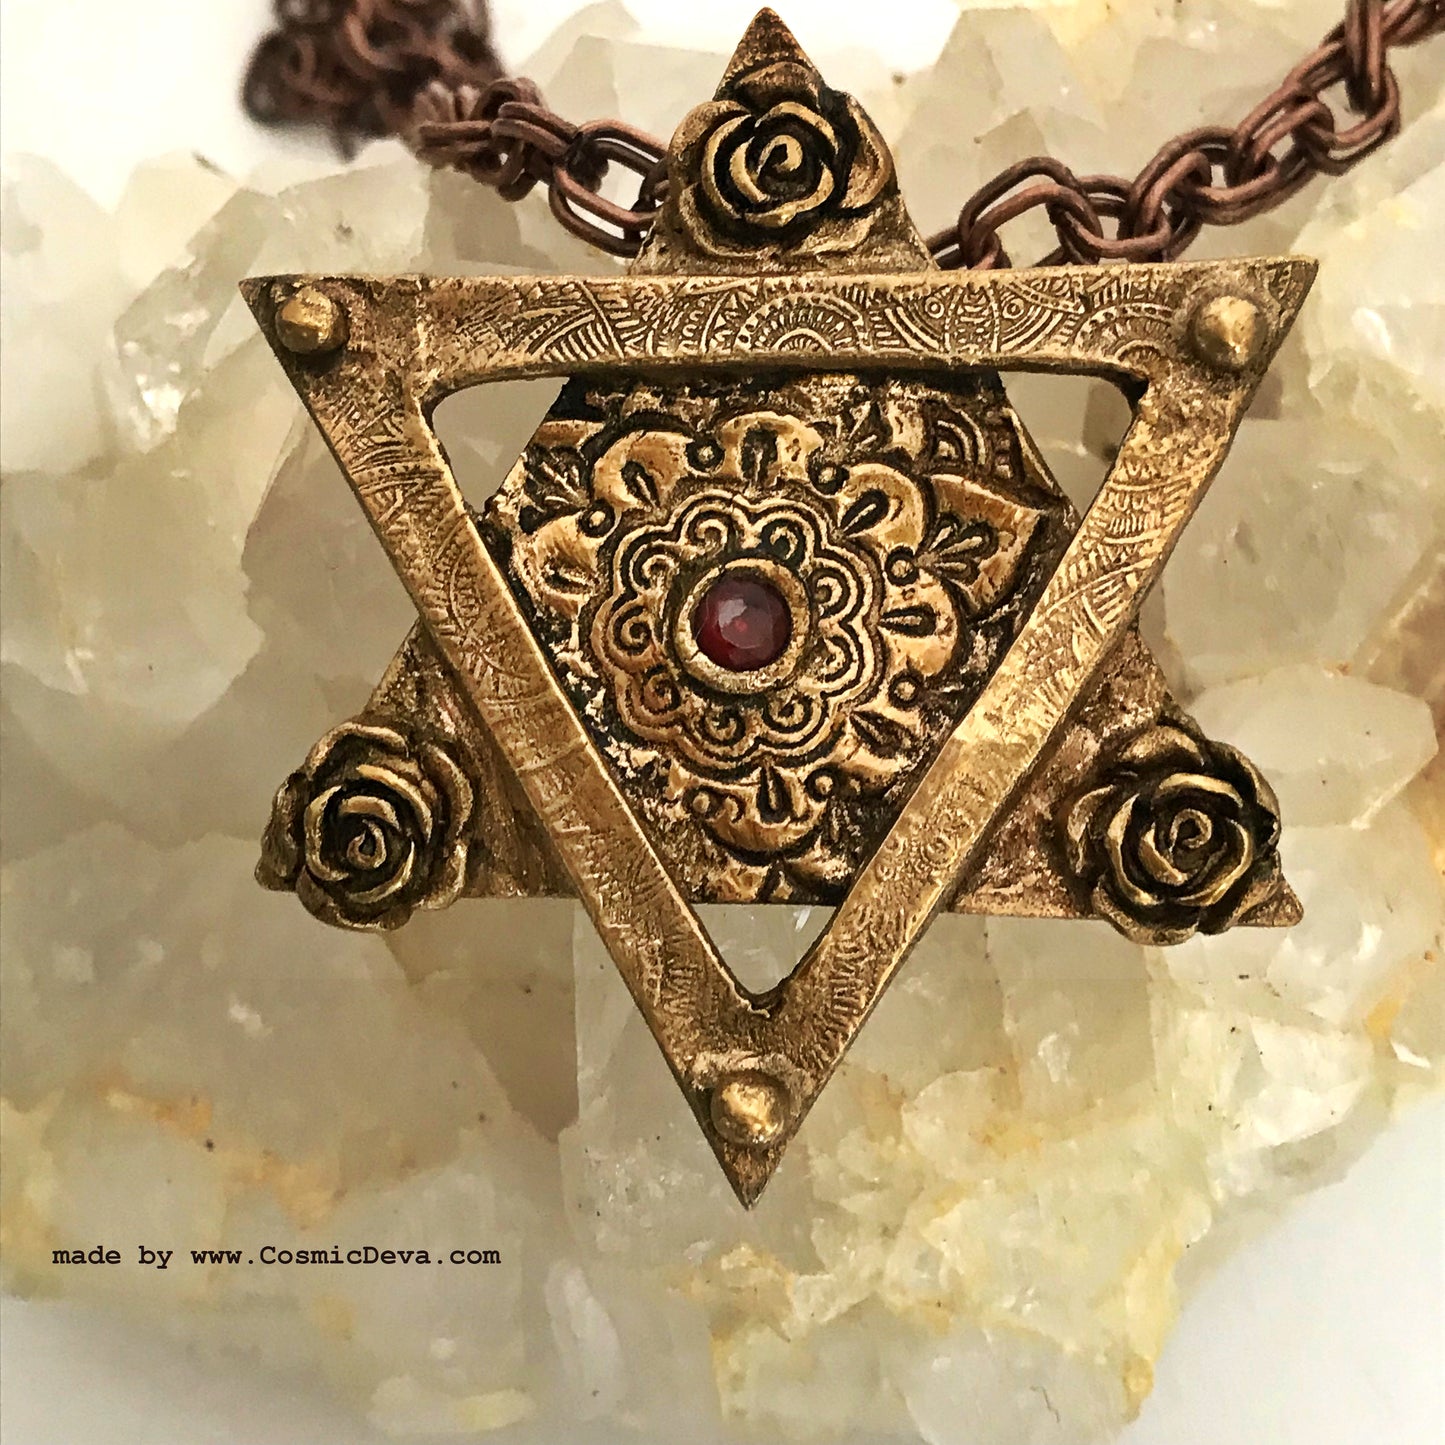 Be the star of any Bat Mitzvah with this exquisite Star of David Necklace! Crafted with an original hand-sculpted bronze design and featuring a red lab-grown garnet hessonite stone, this unique Magen David pendant will add a touch of elegance and tradition to your special day.- CosmicDeva